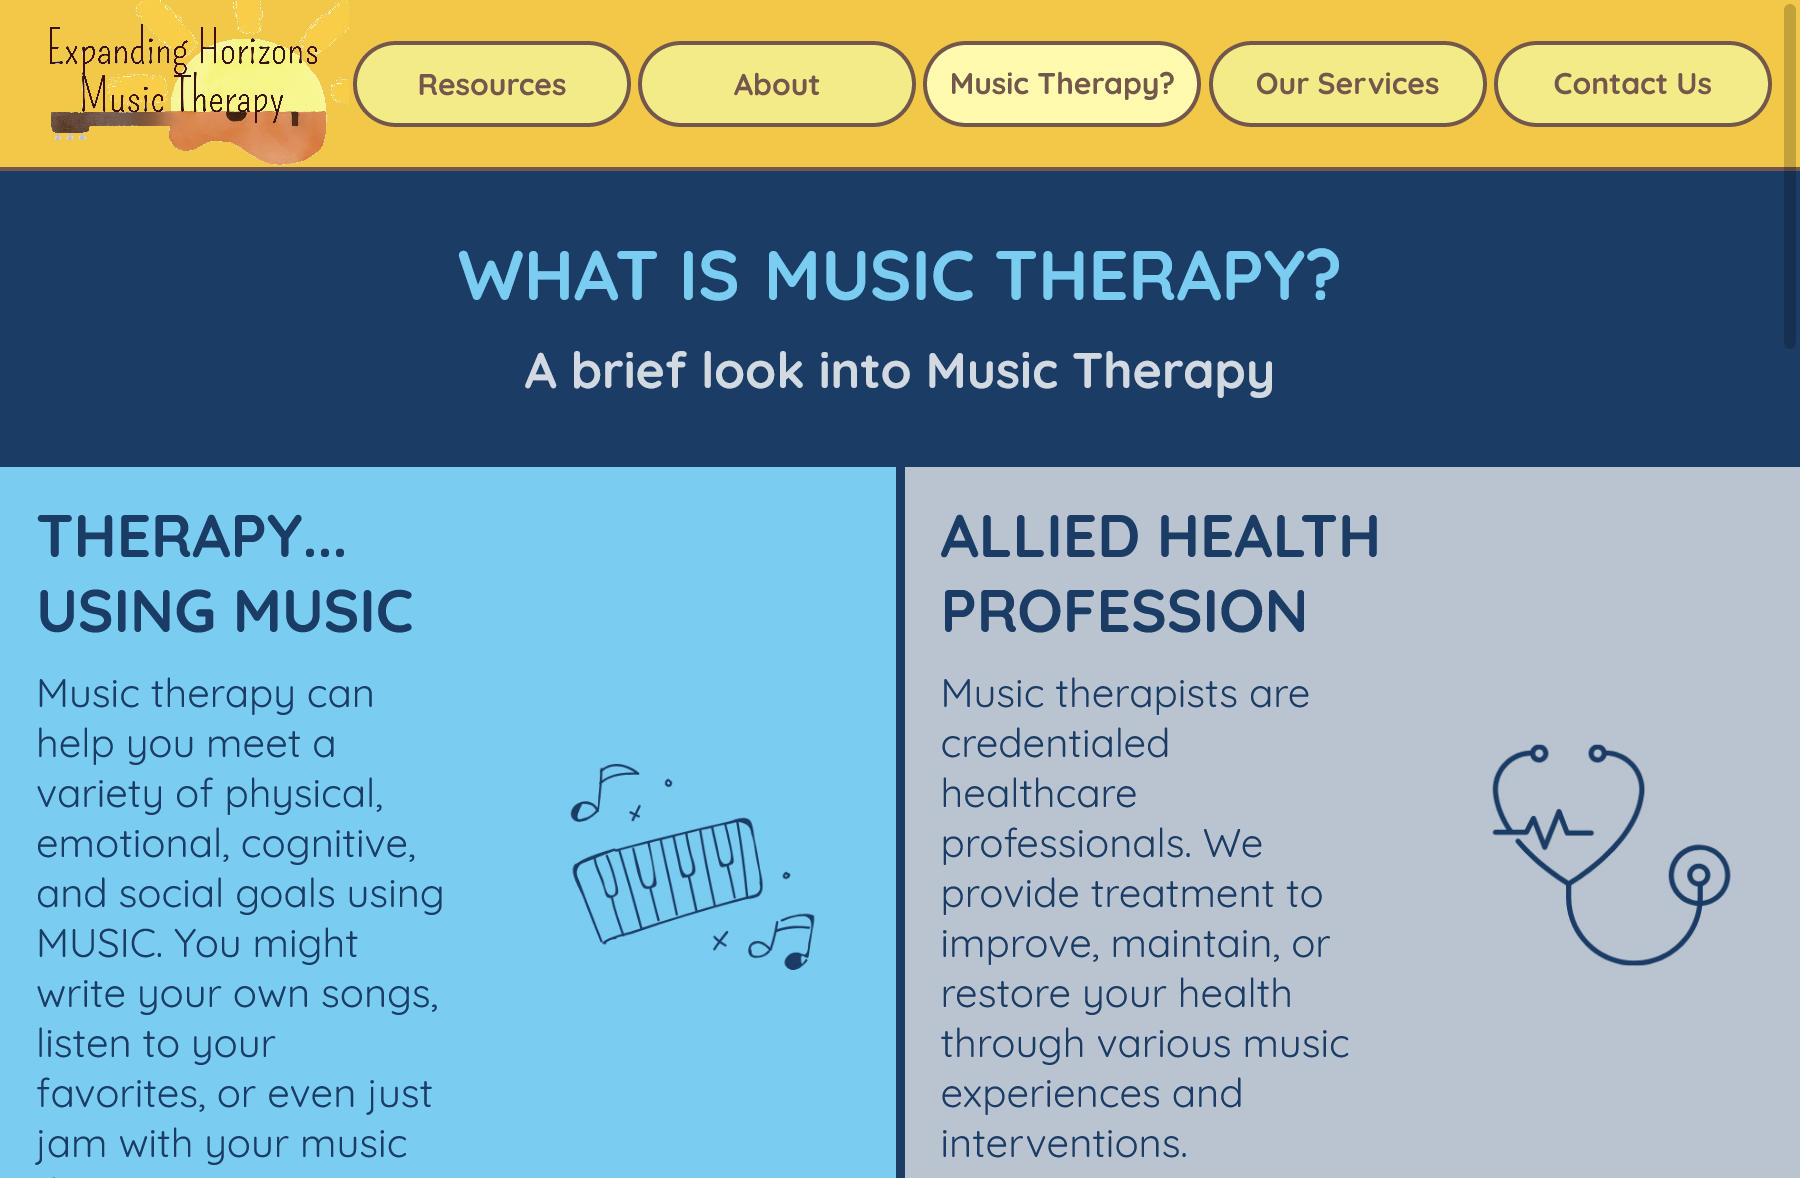 Desktop Preview of Expanding Horizons Music Therapy Website